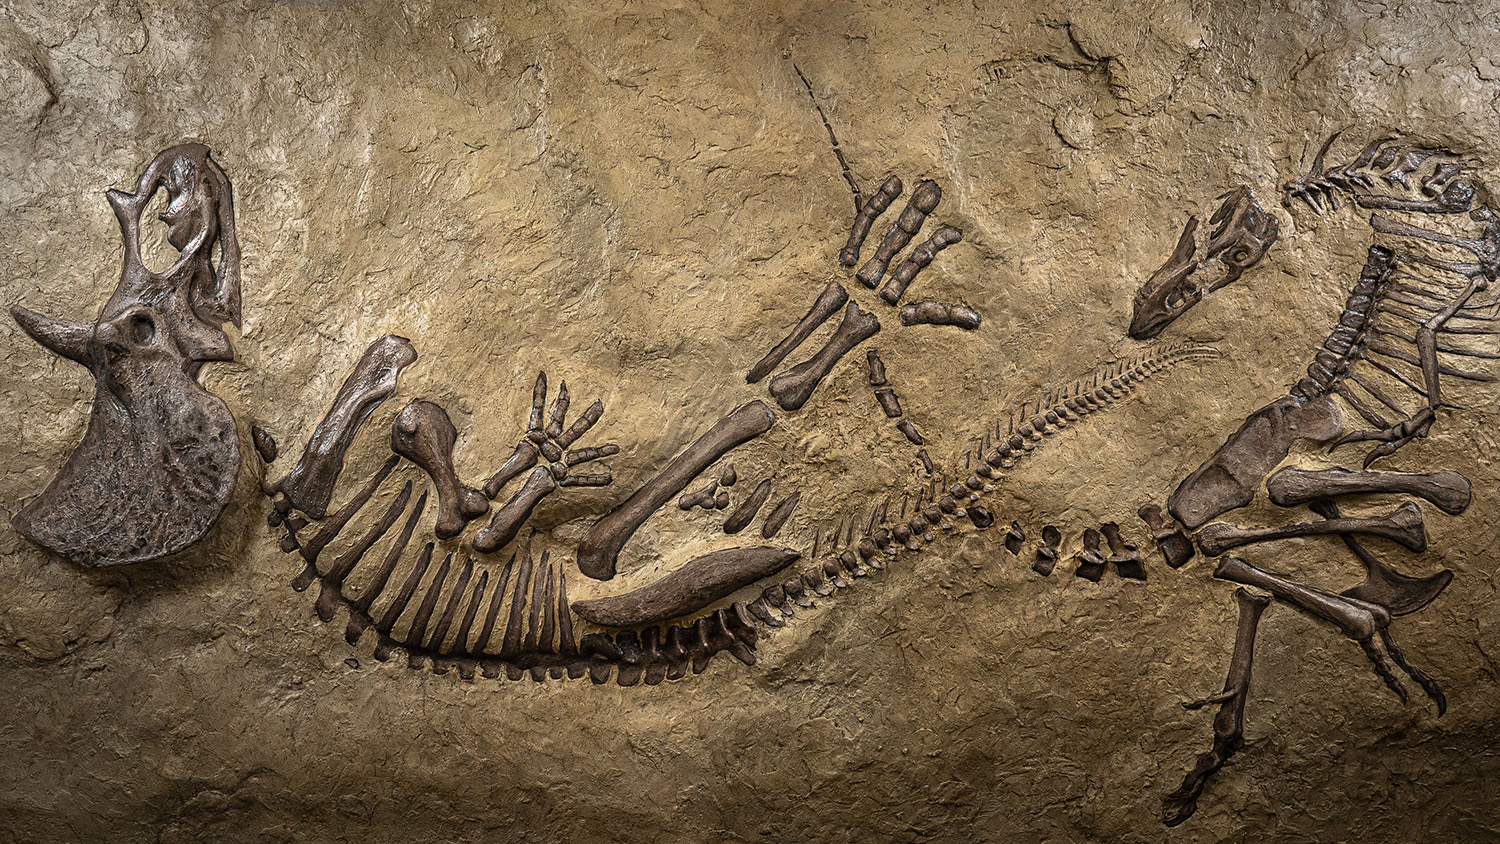 A replica of the "Dueling Dinosaurs" fossils